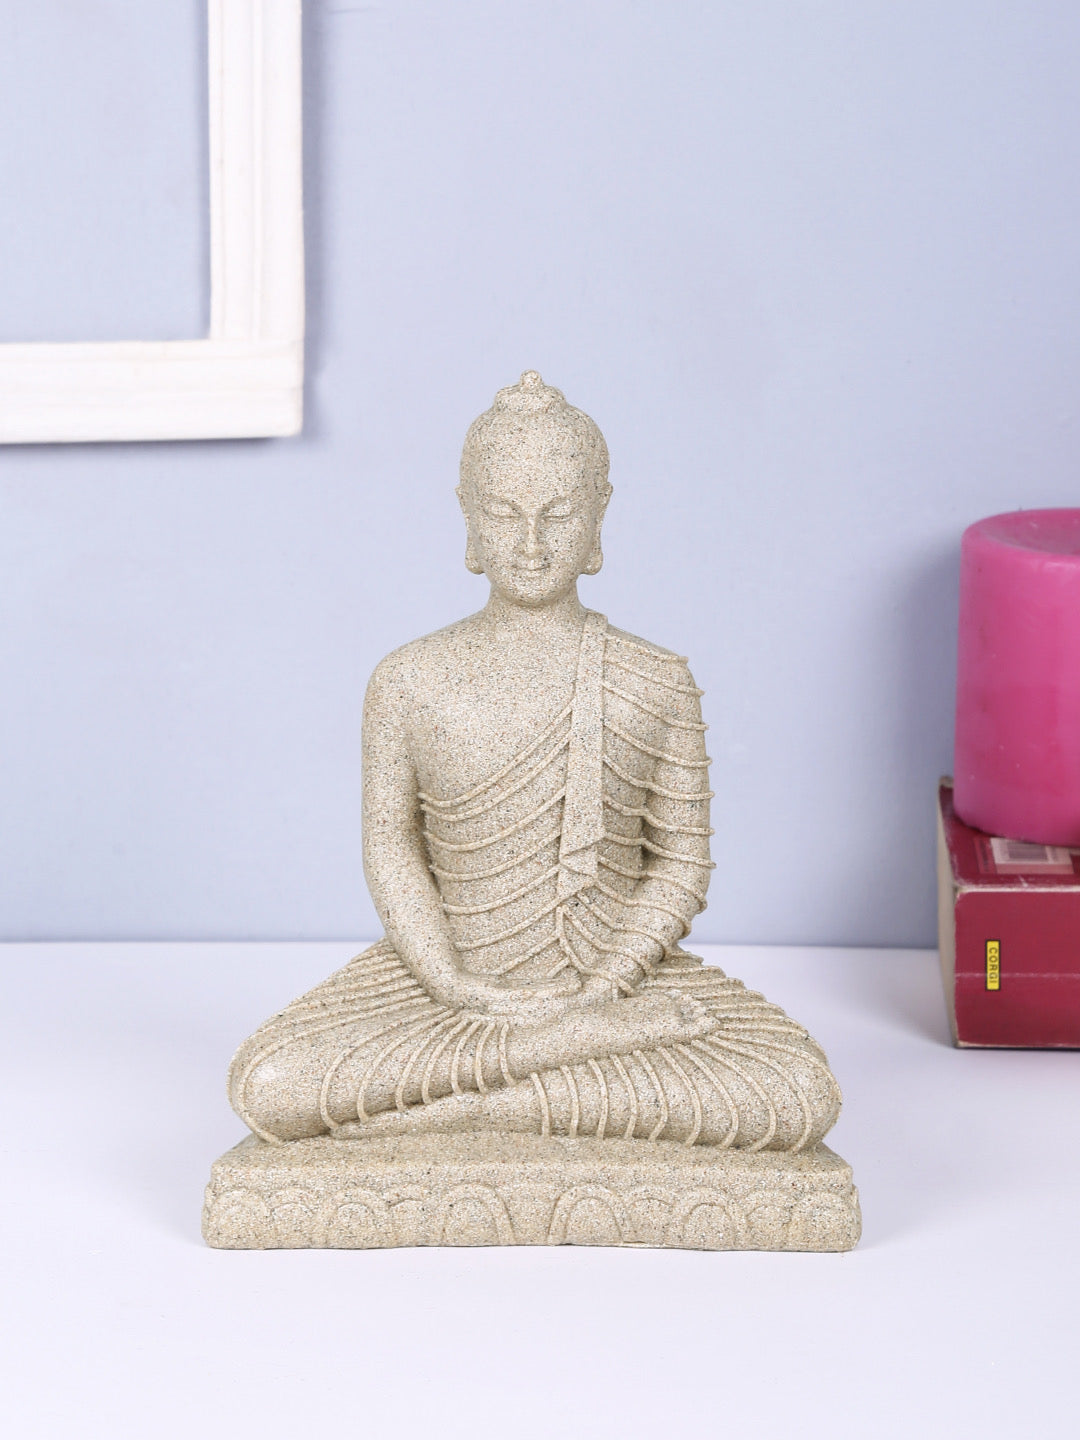 Meditating and Tranquil Sand Stone Buddha Statue - Default Title (REF19661)